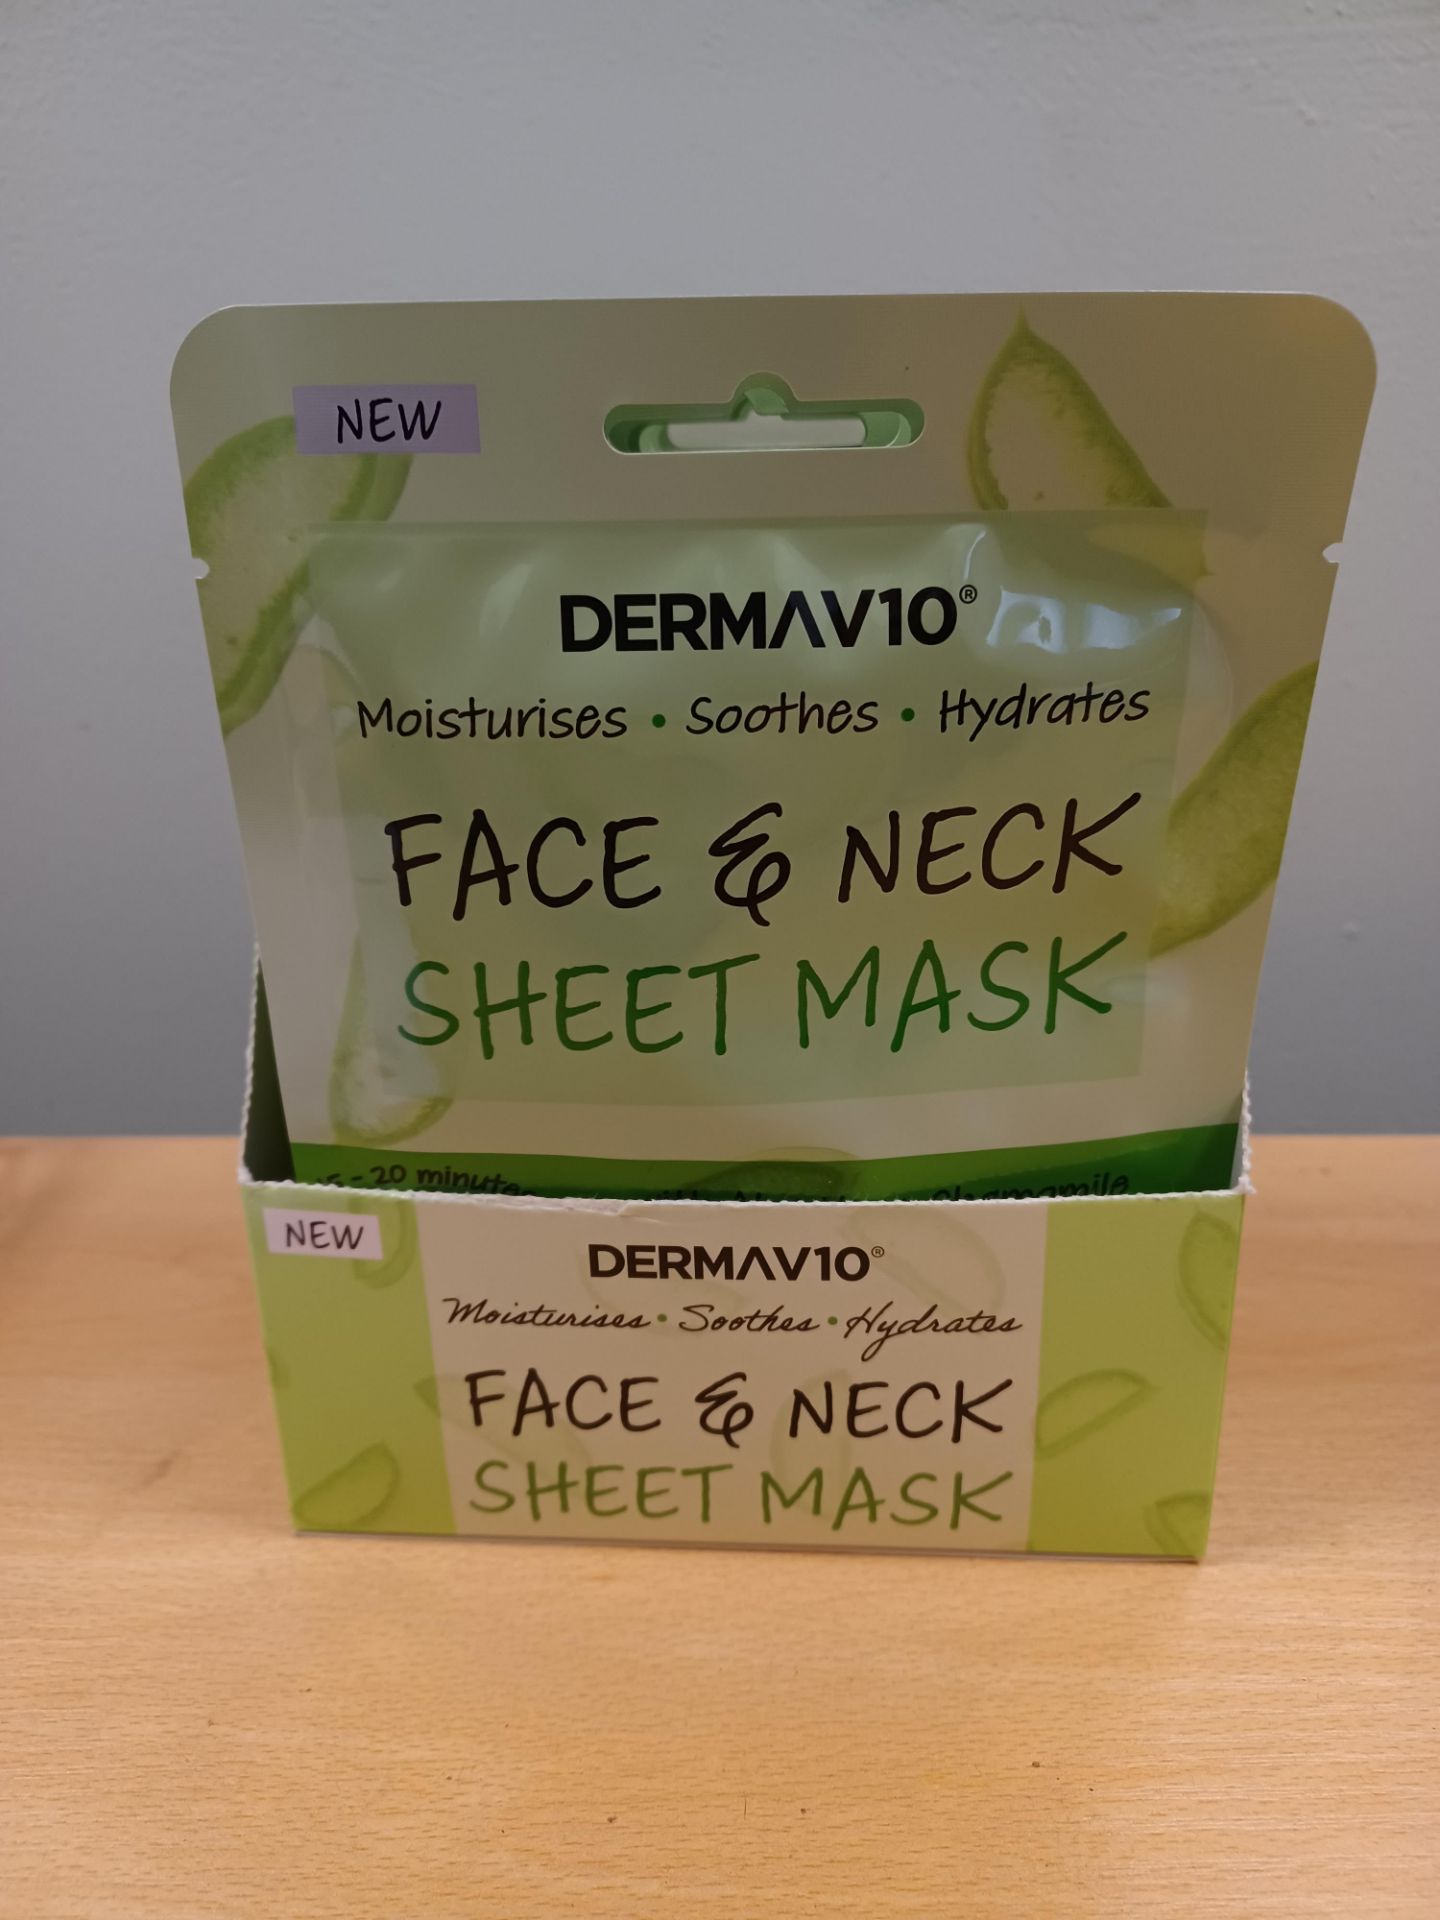 144 x NEW PACKAGED DERMAV10 FACE & NECK SHEET MASKS. MOISTURISES, SOOTHES, HYDRATES. WITH ALOE VERA,